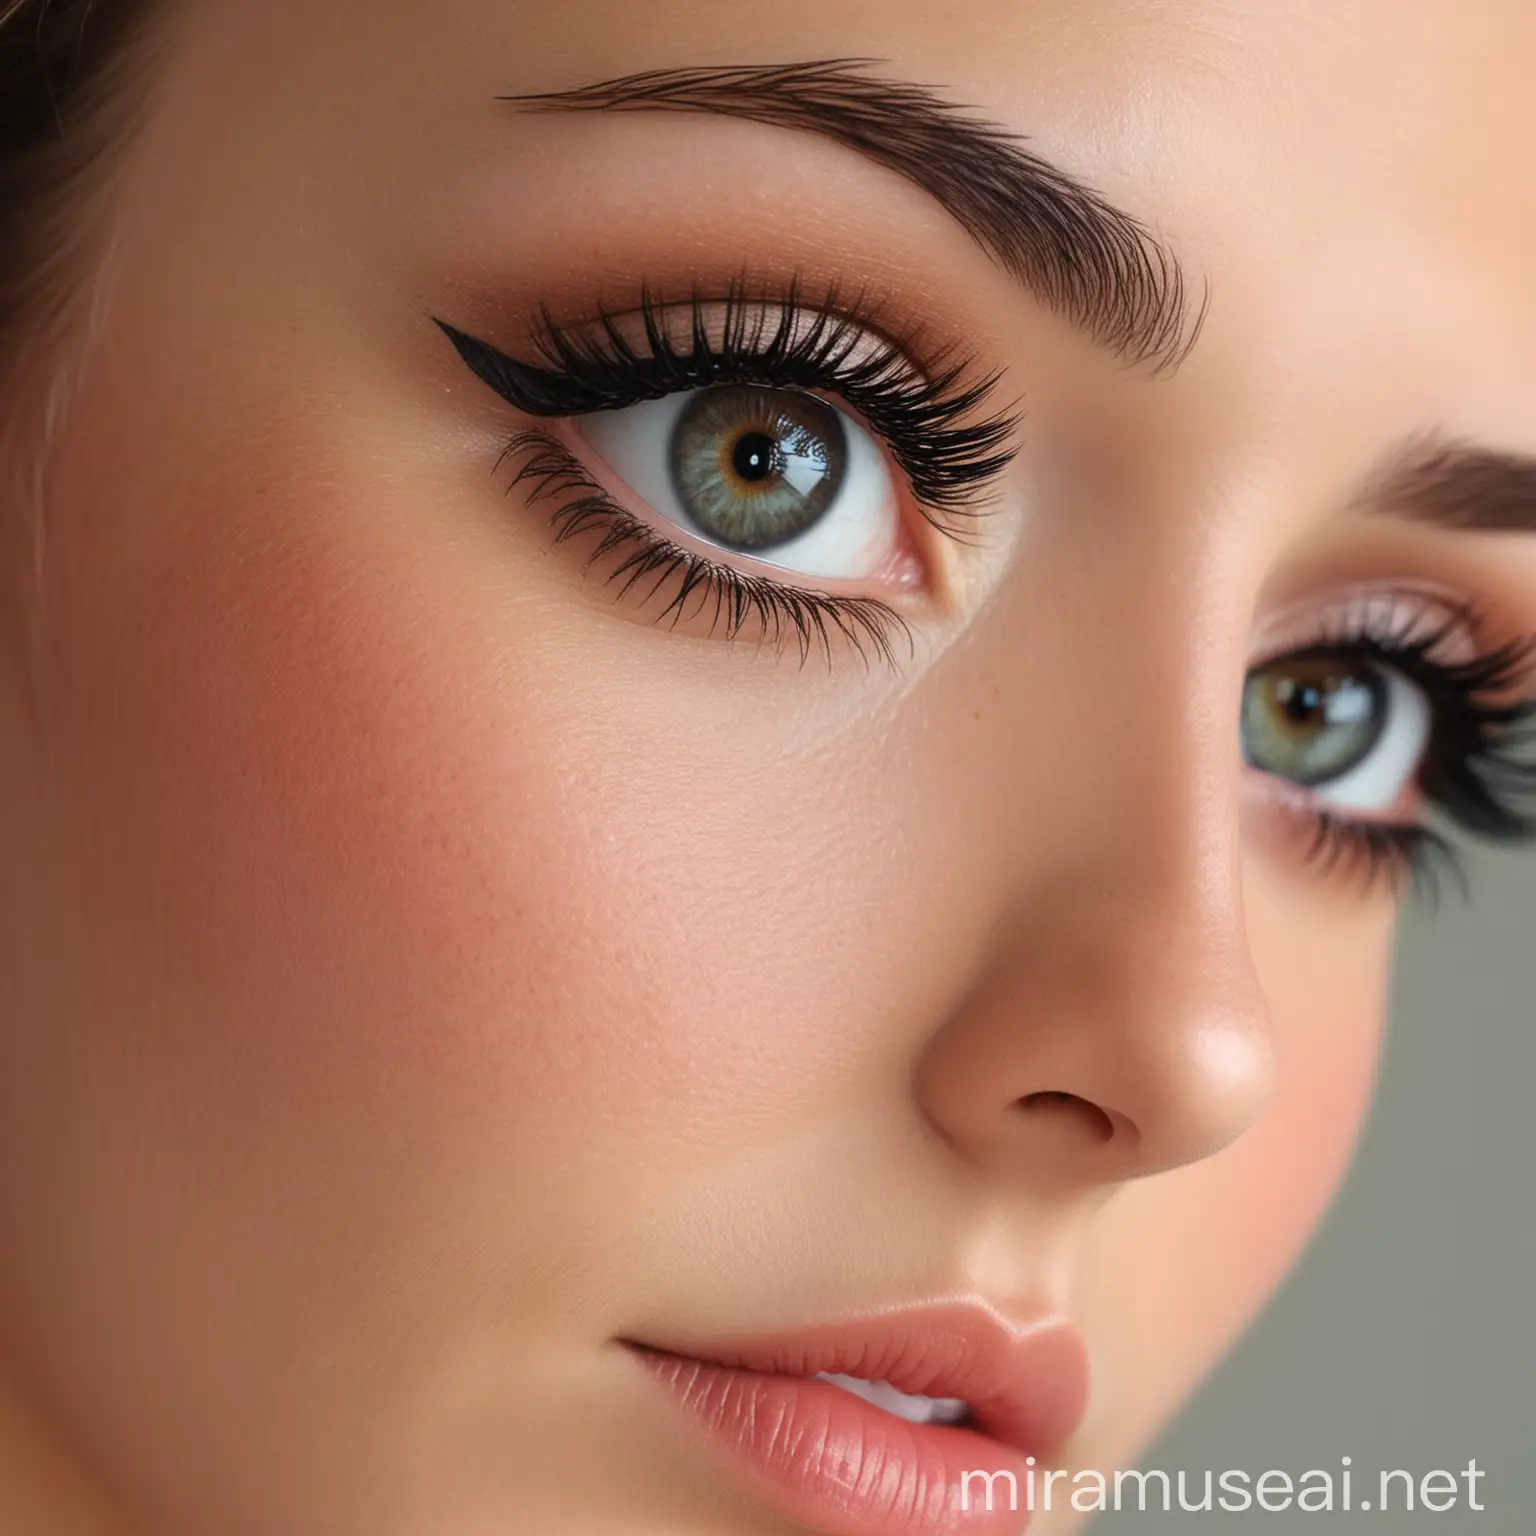 want left half of face to look like character in picture with prominent eyelashes